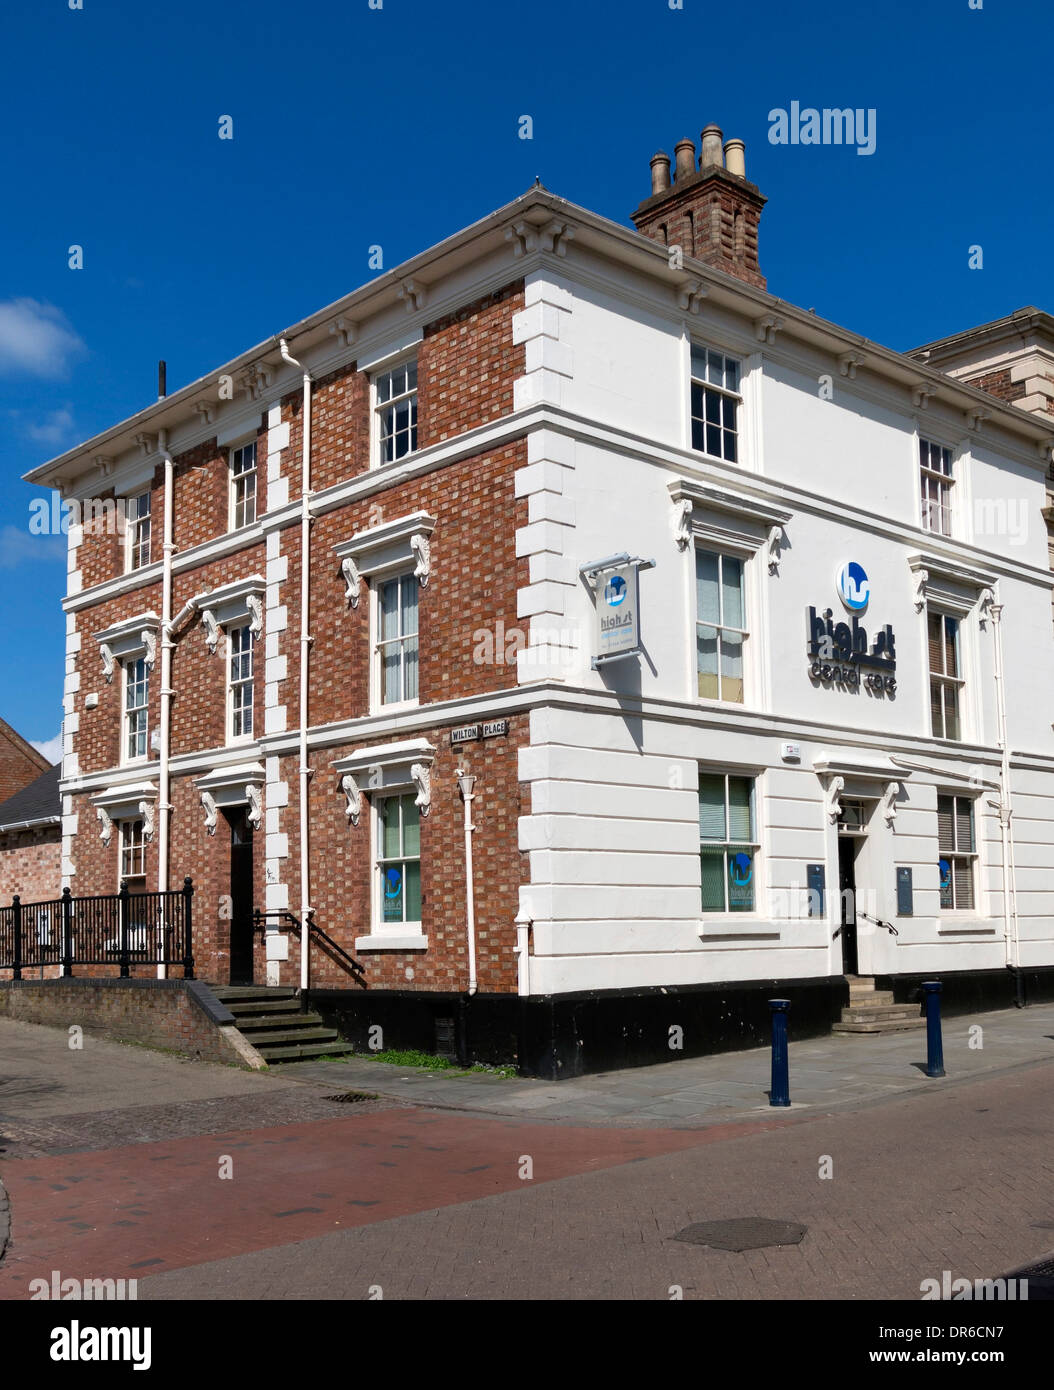 Old building with ornate facade in Flemish bonded red brickwork with light headers, High Street Dental Care, Melton Mowbray. Stock Photo